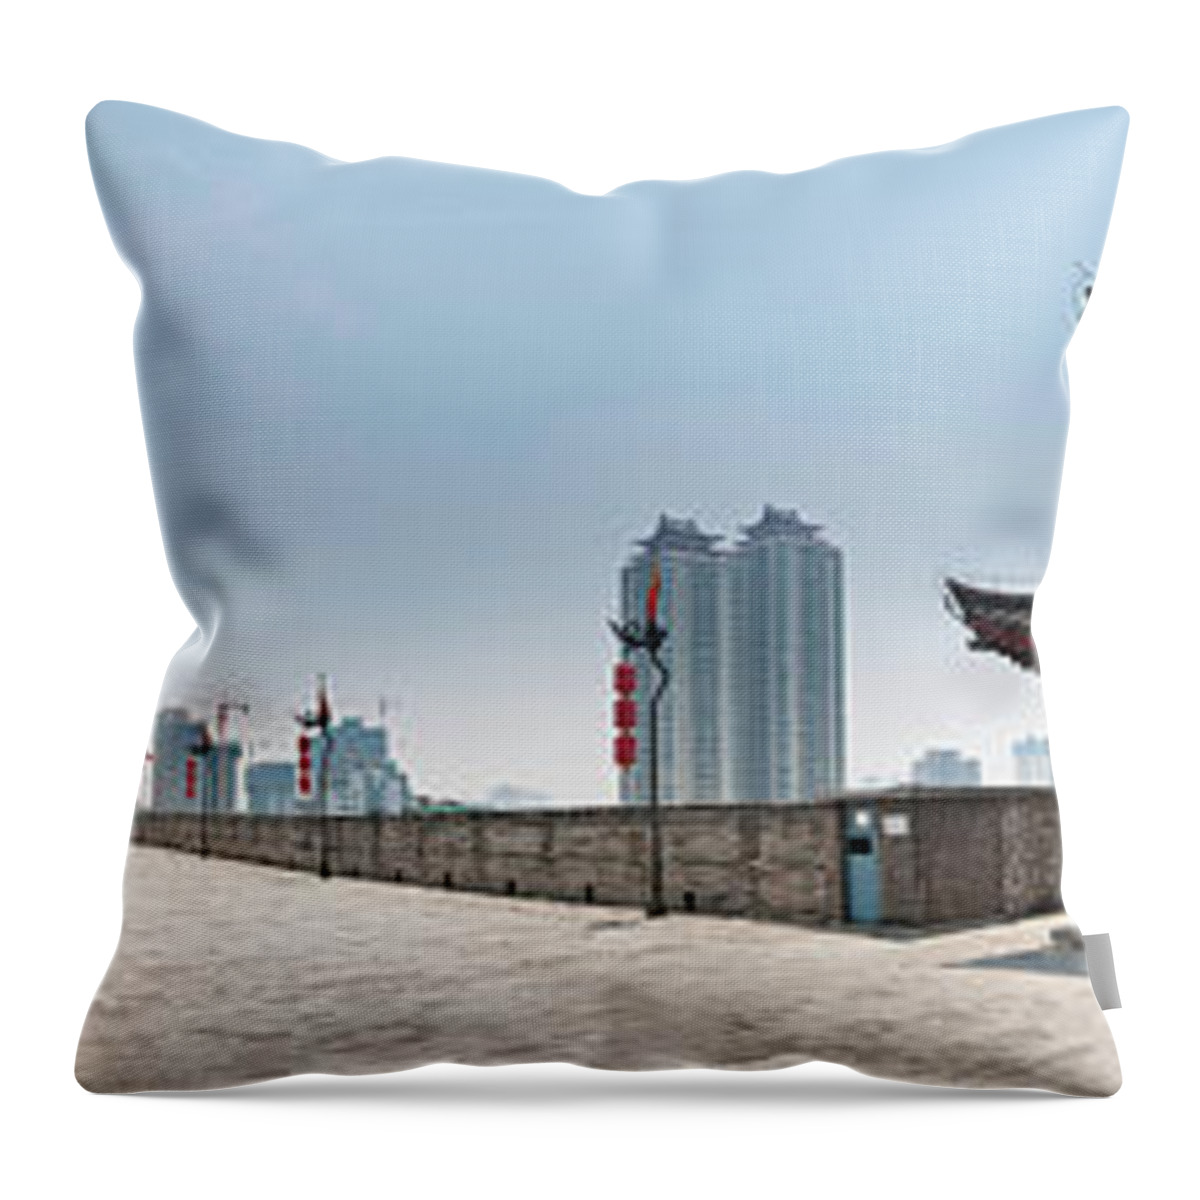 Chinese Culture Throw Pillow featuring the photograph China Xian Ancient City Walls Modern by Fotovoyager